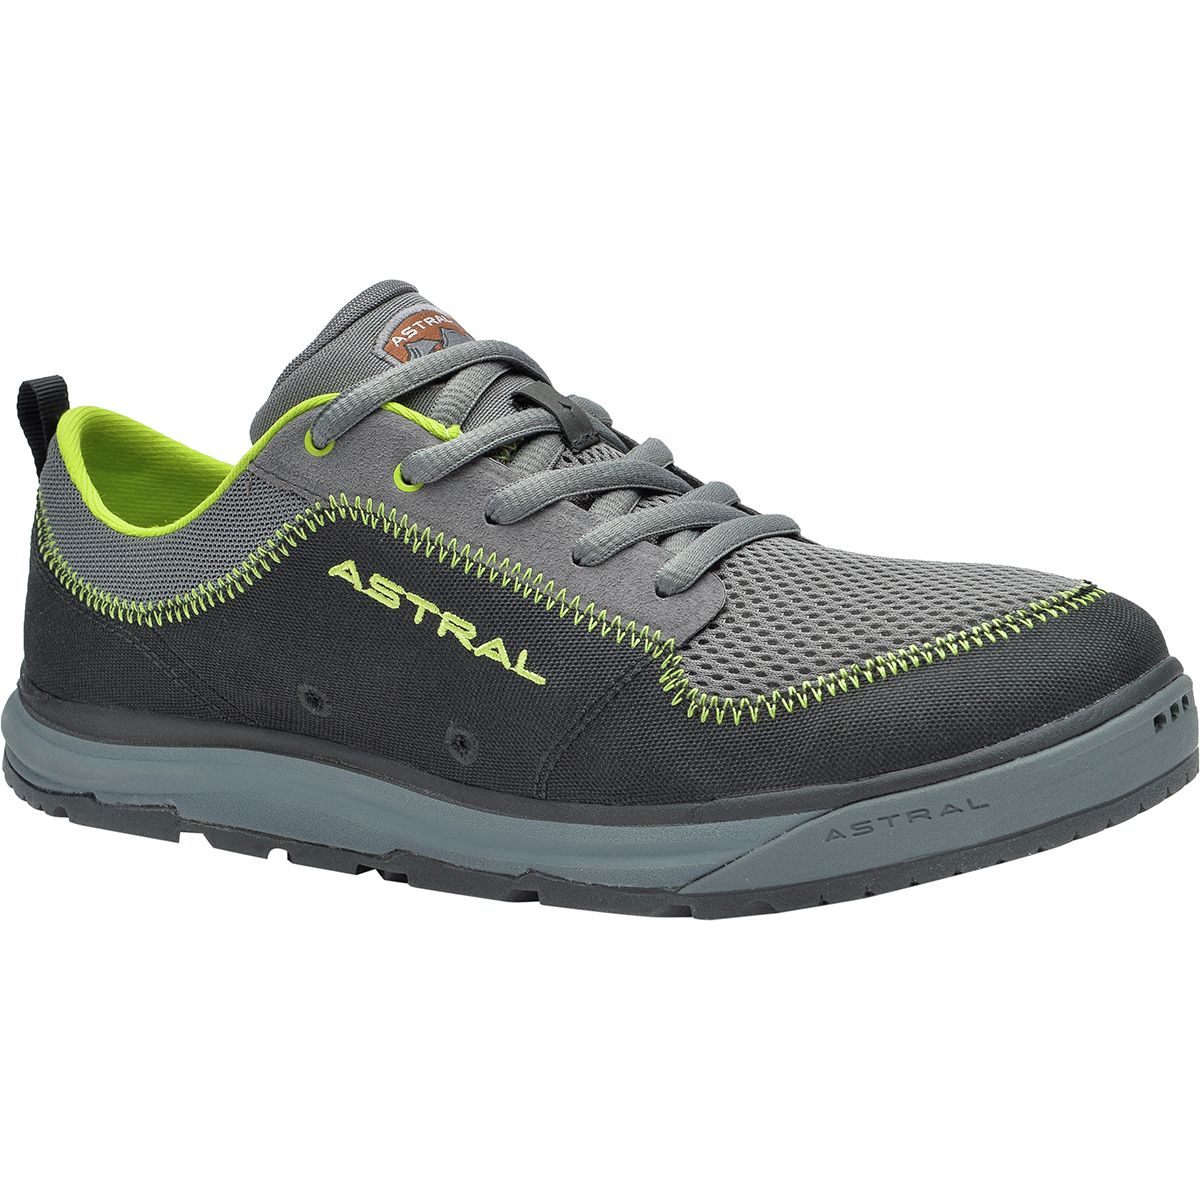 Astral Brewer 2 Water Shoe Men's